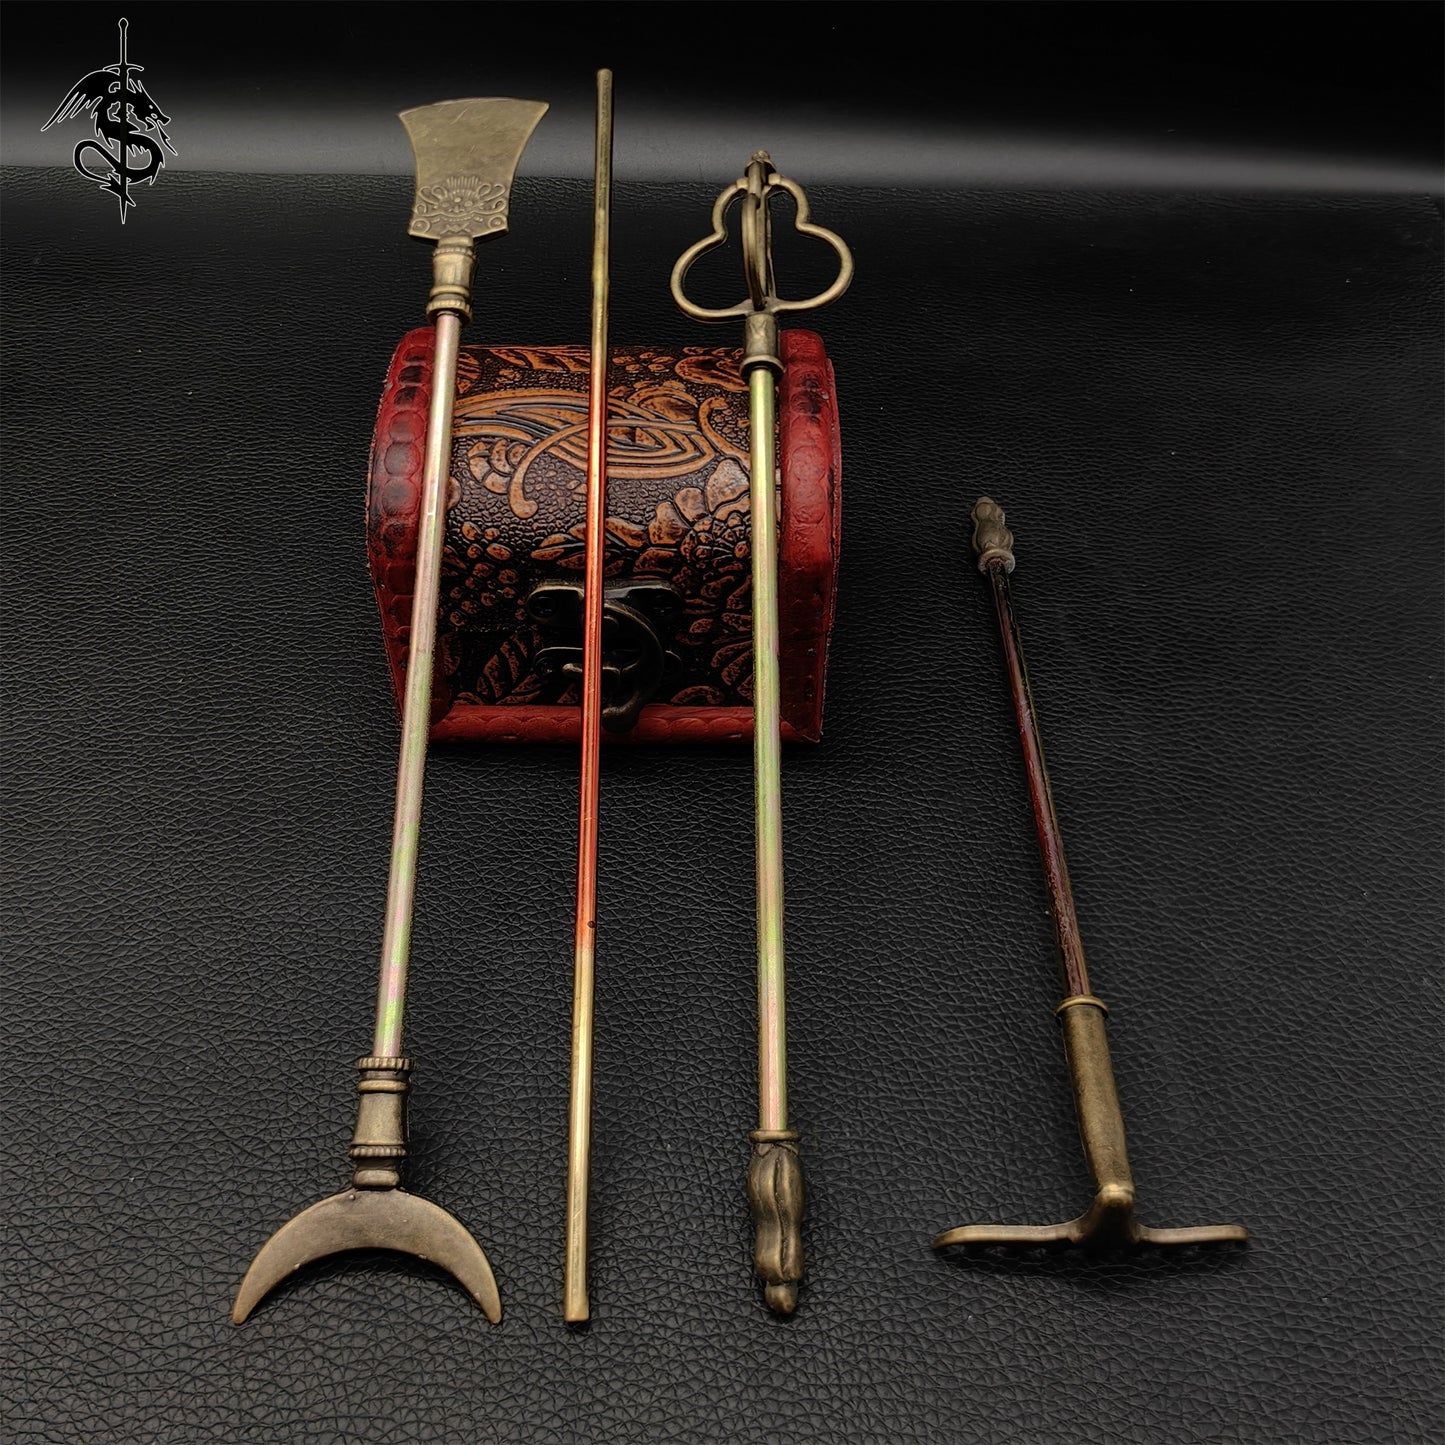 The Journey to The West Metal Weapons Miniature 4 In 1 Pack With Stand